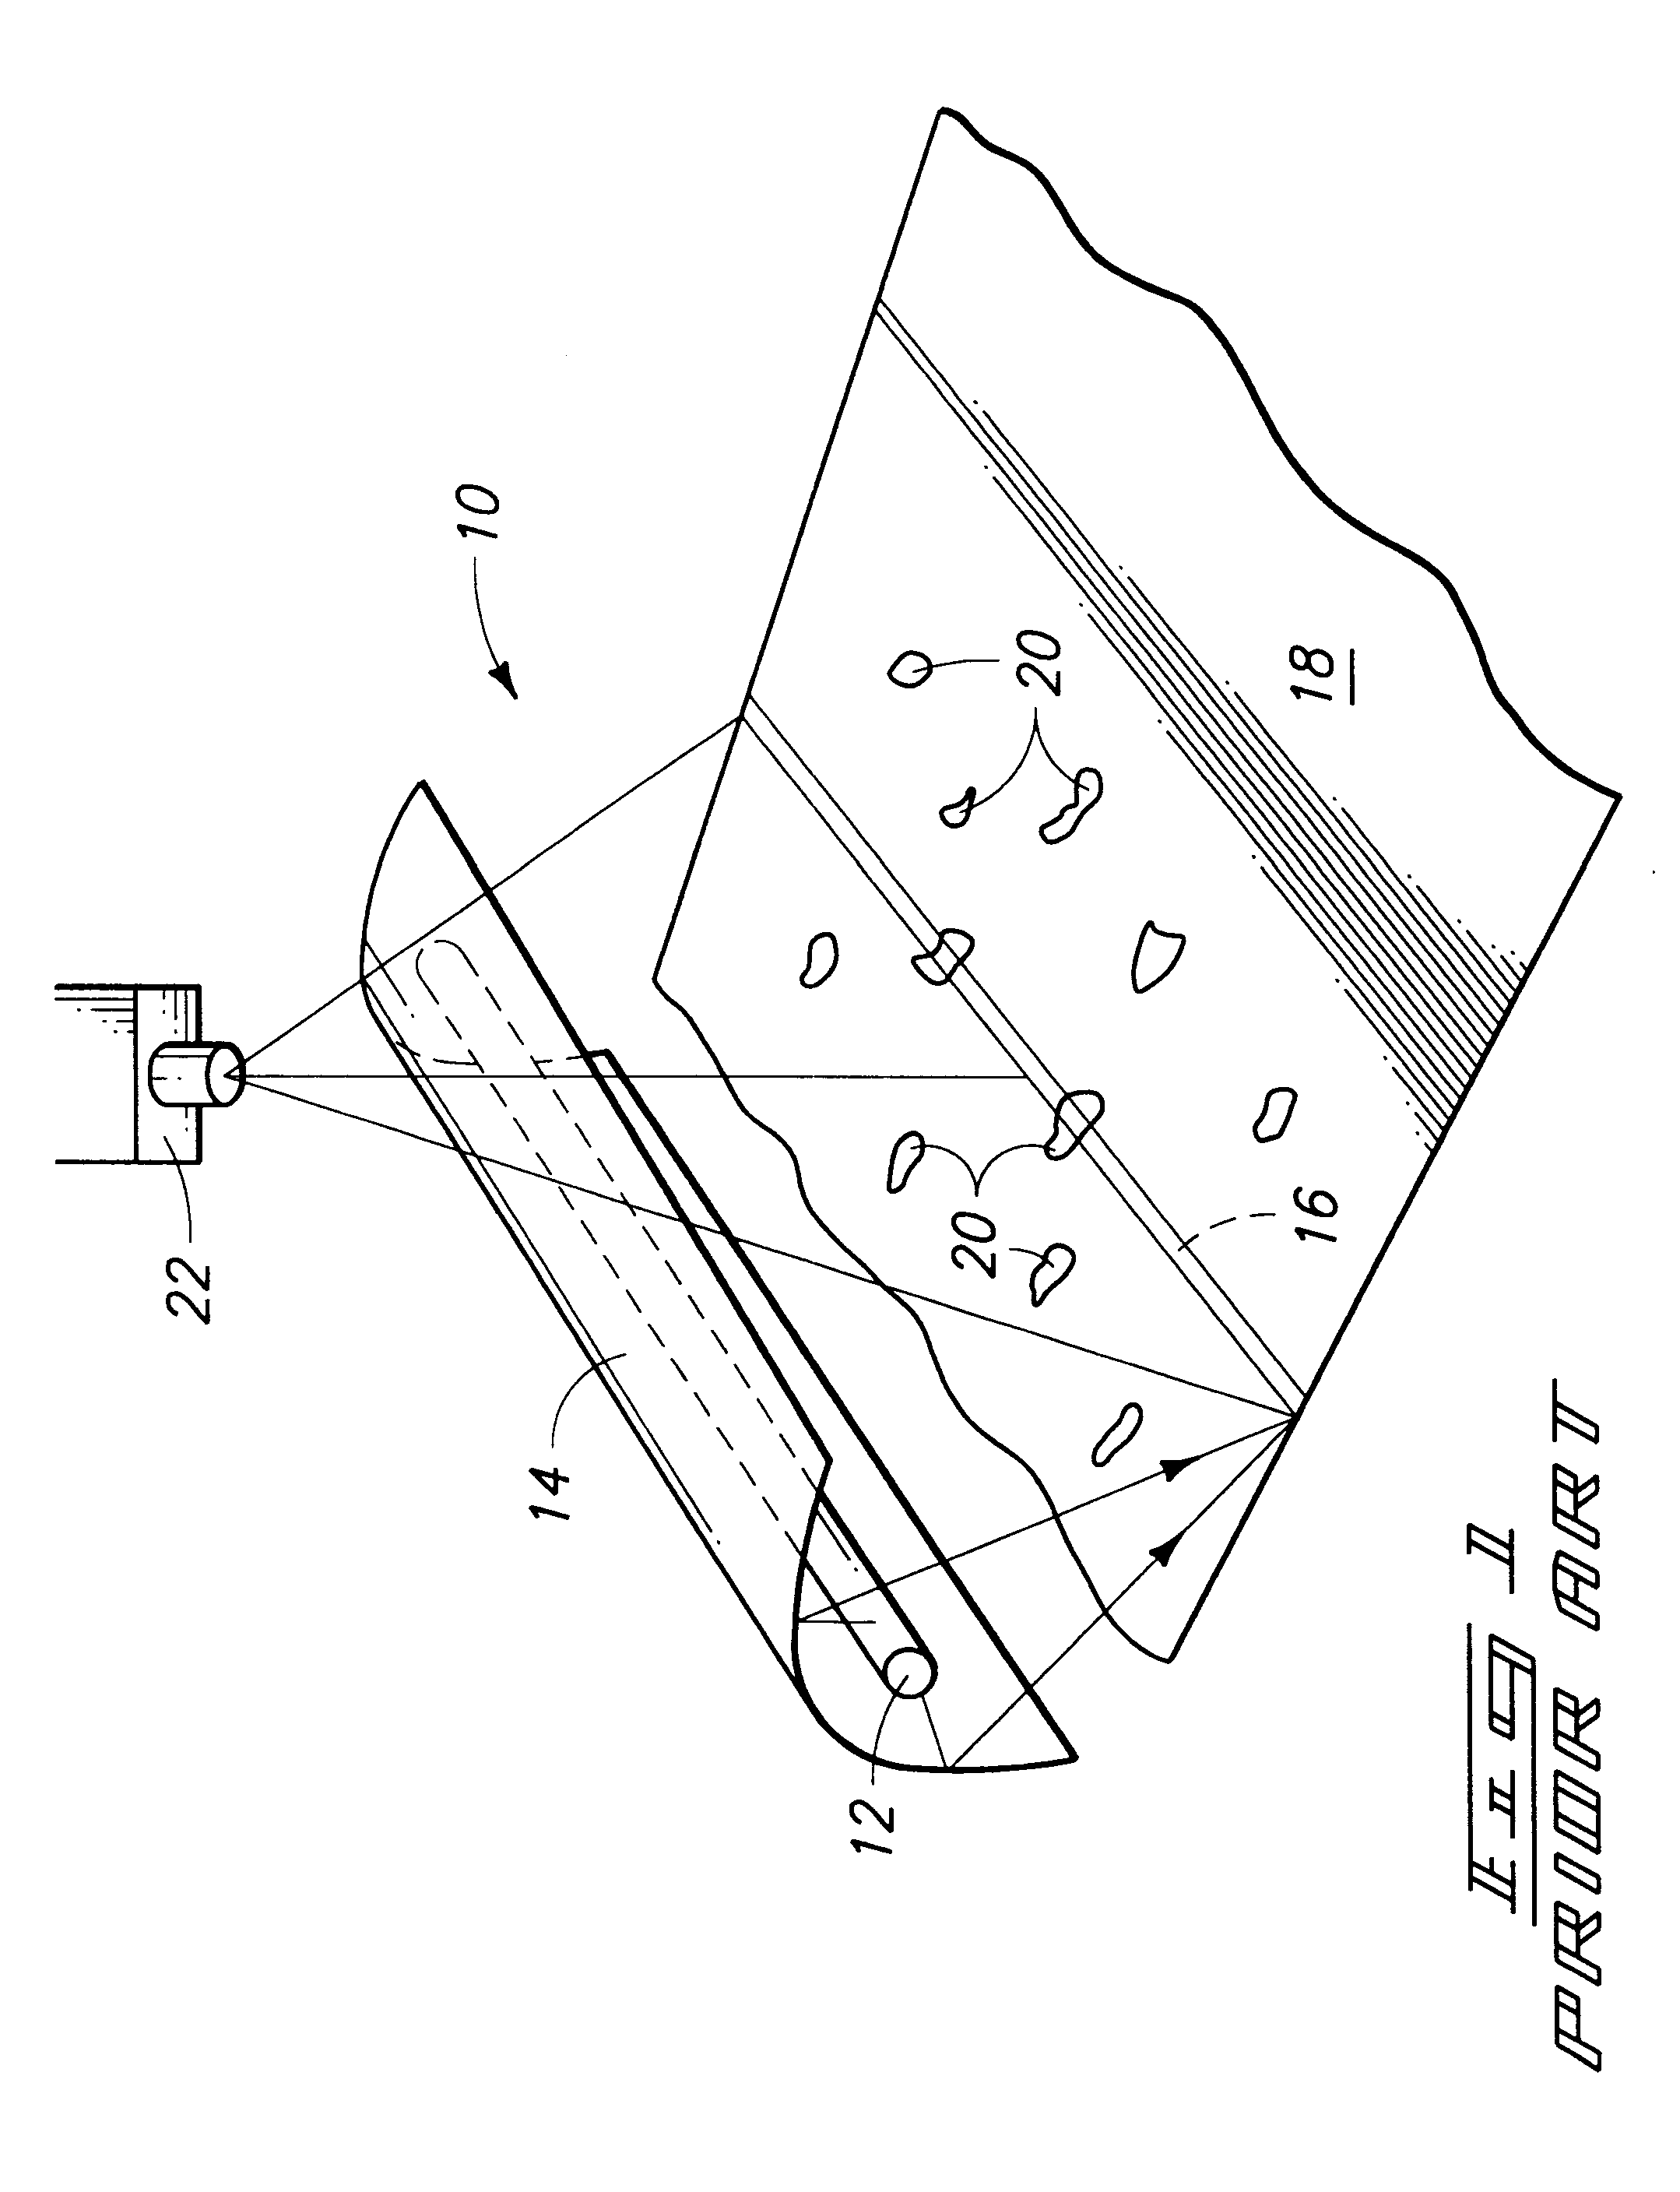 Peach pit detection apparatus and method